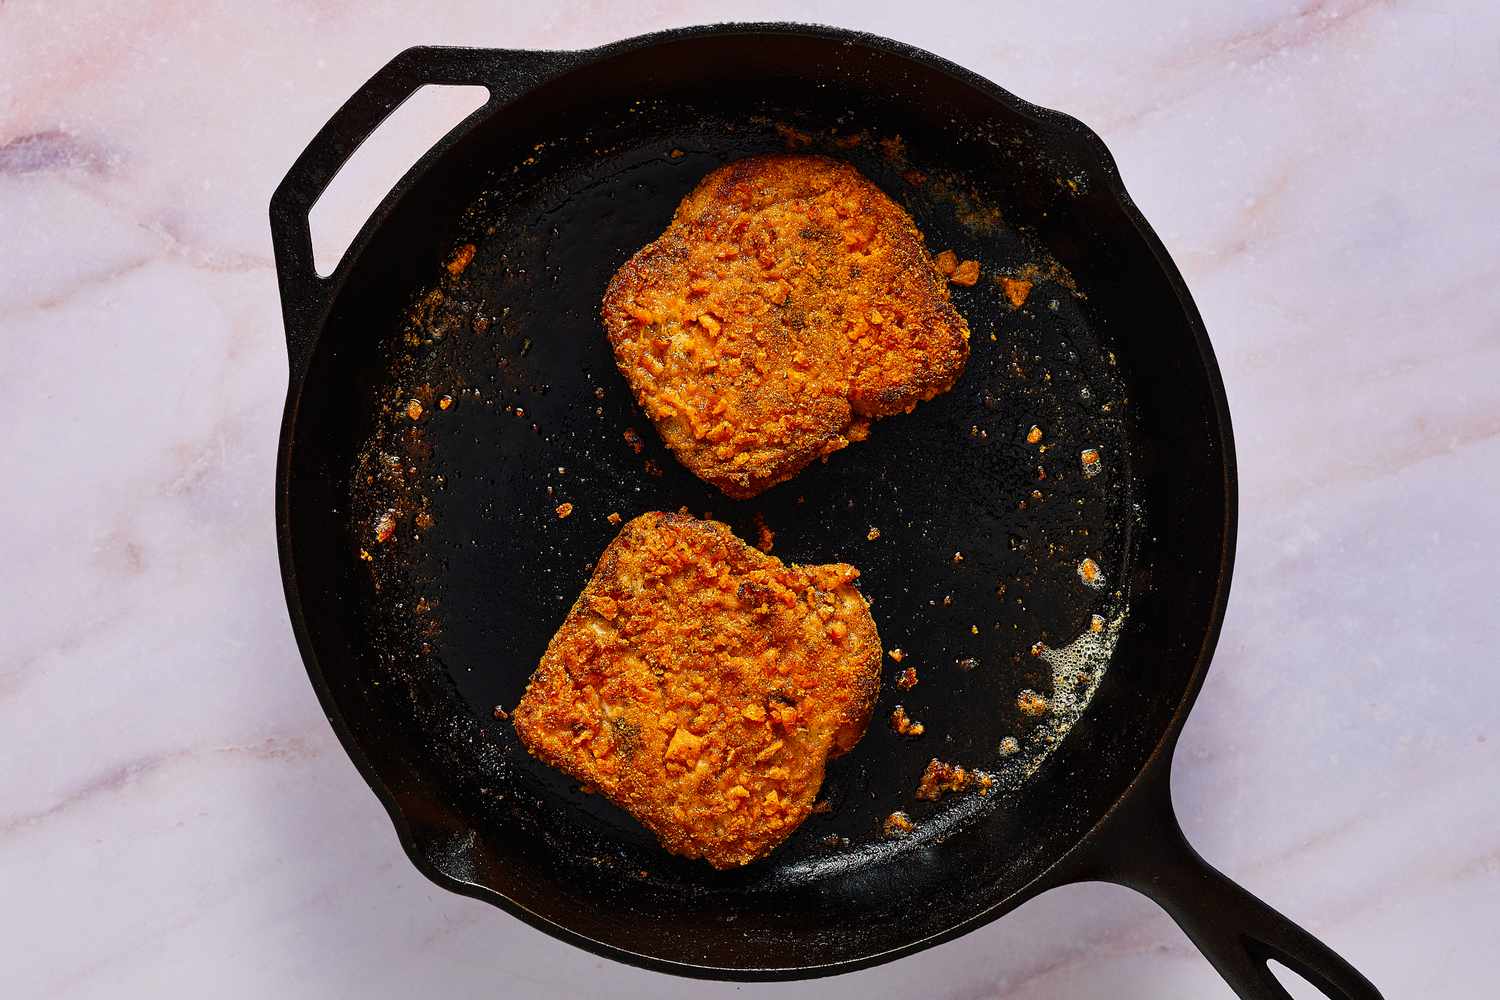 Two pieces of French toast cooking in a skillet